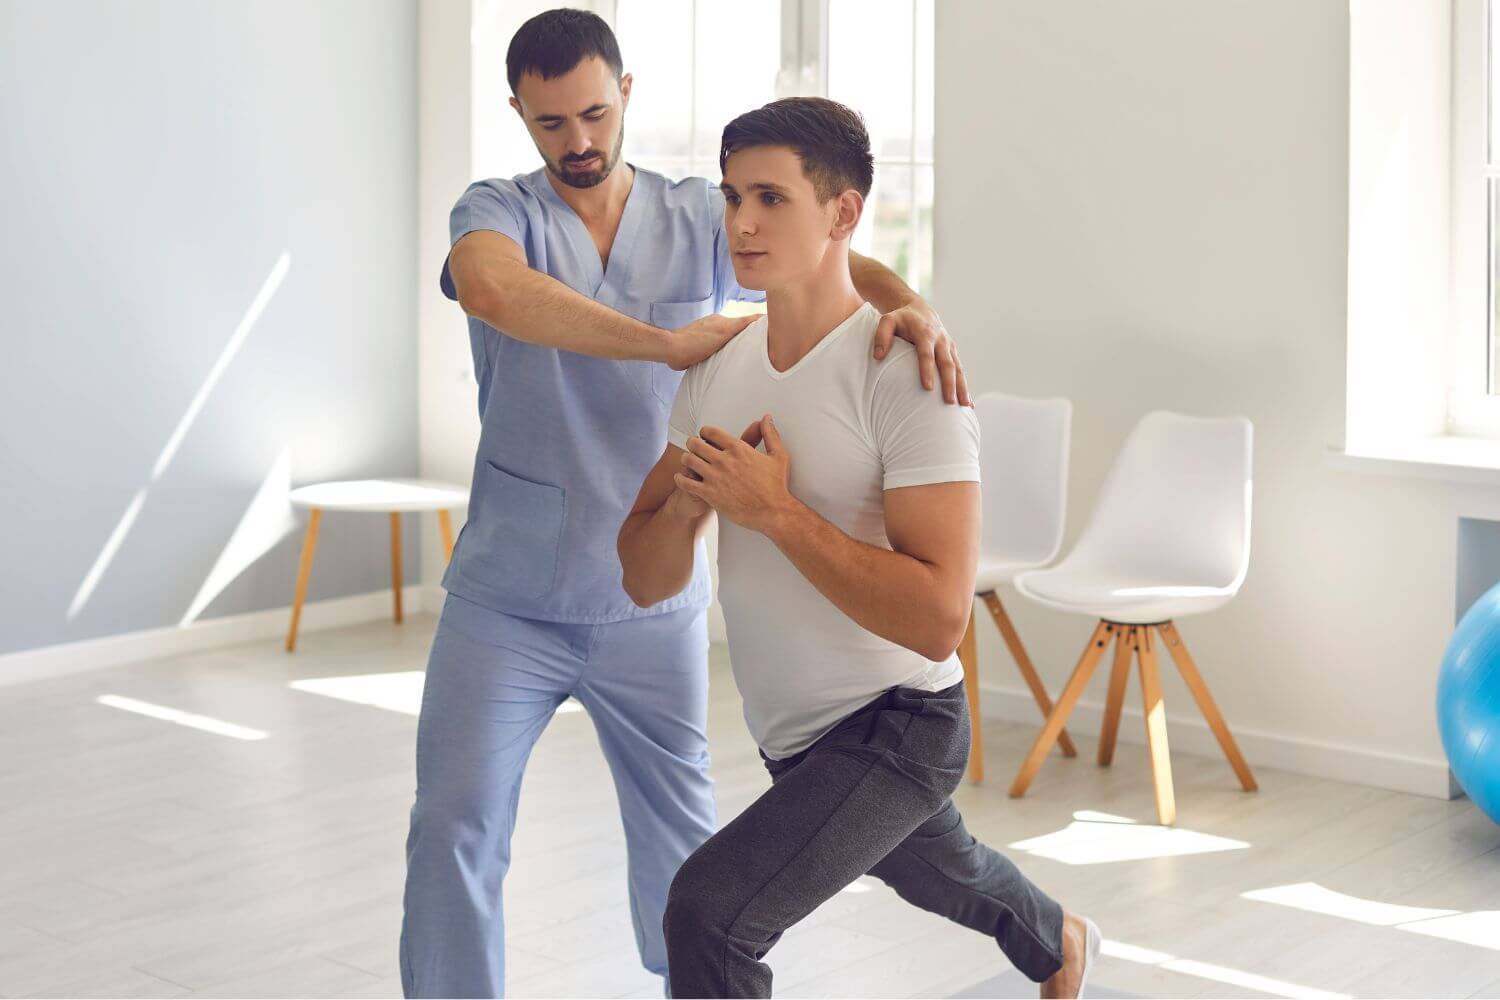 Benefits Of Physiotherapy And Chiropractic Treatment Following A Personal Injury